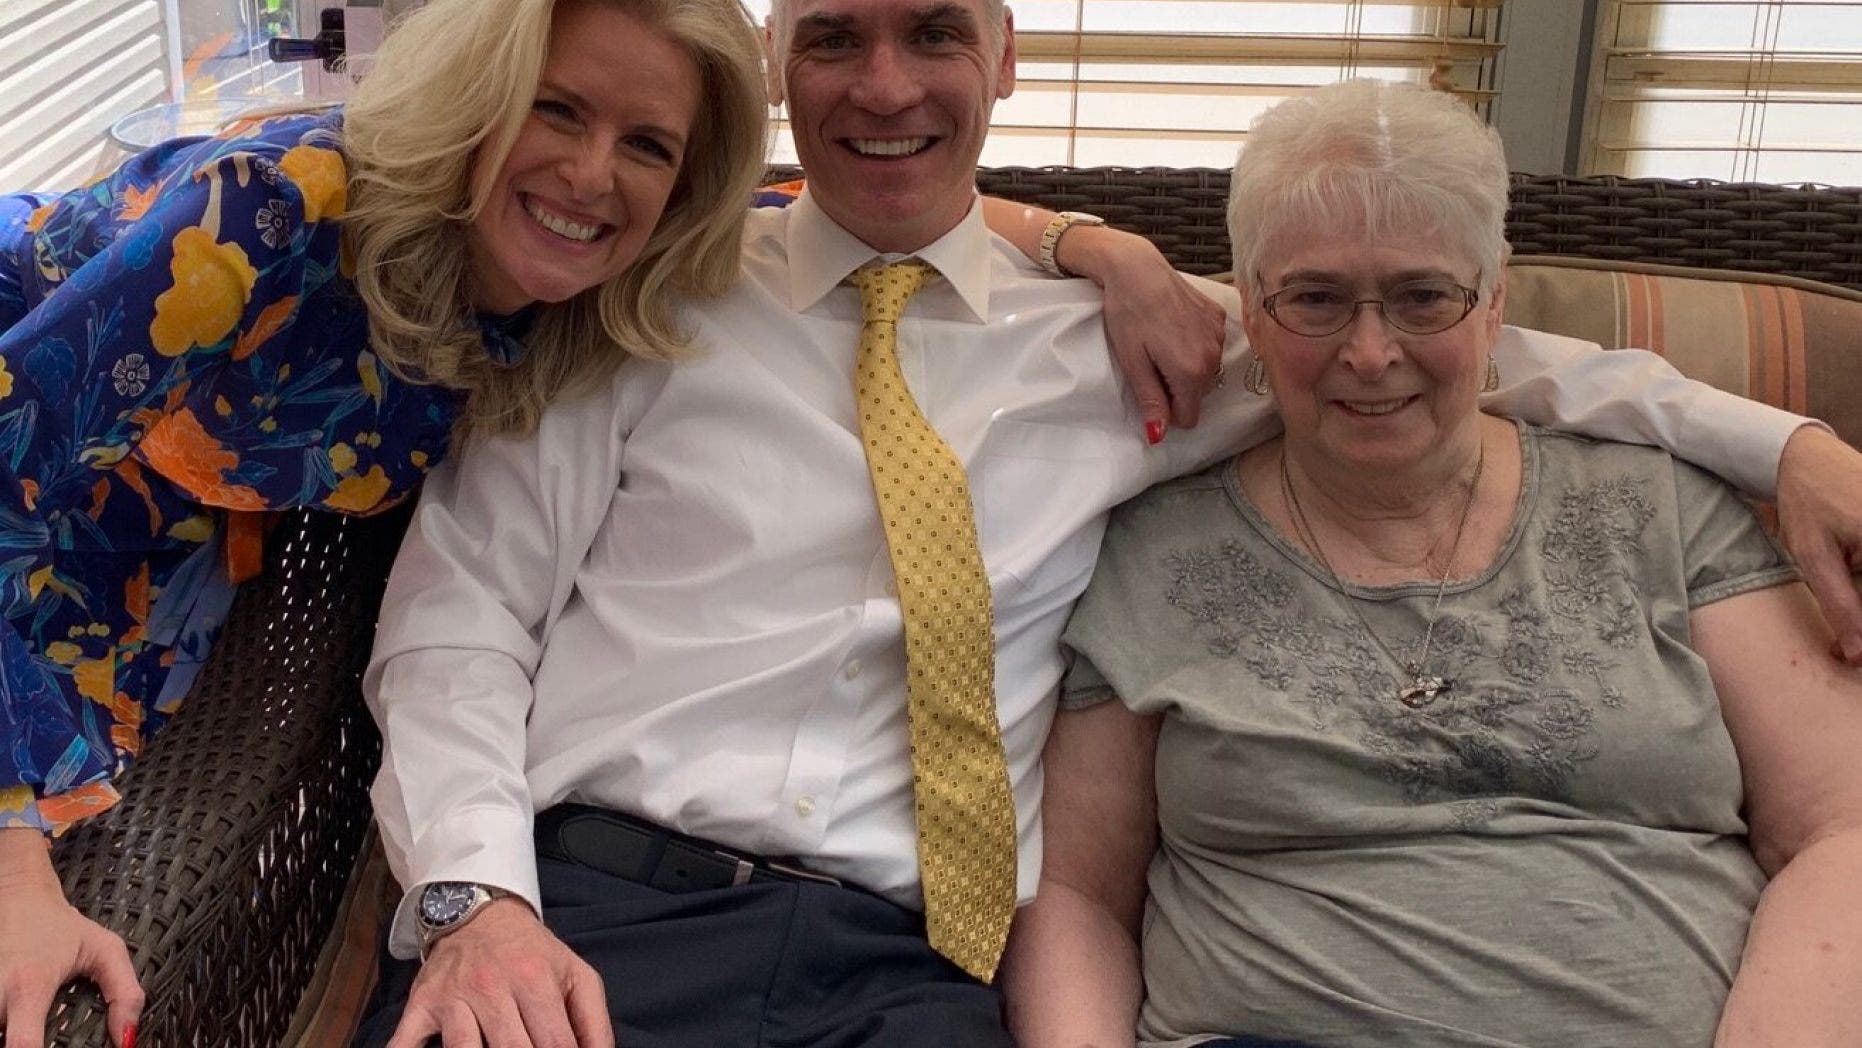 Janice Dean: Cuomo, COVID and the anniversary of my mother-in-law's death – why this week was so hard